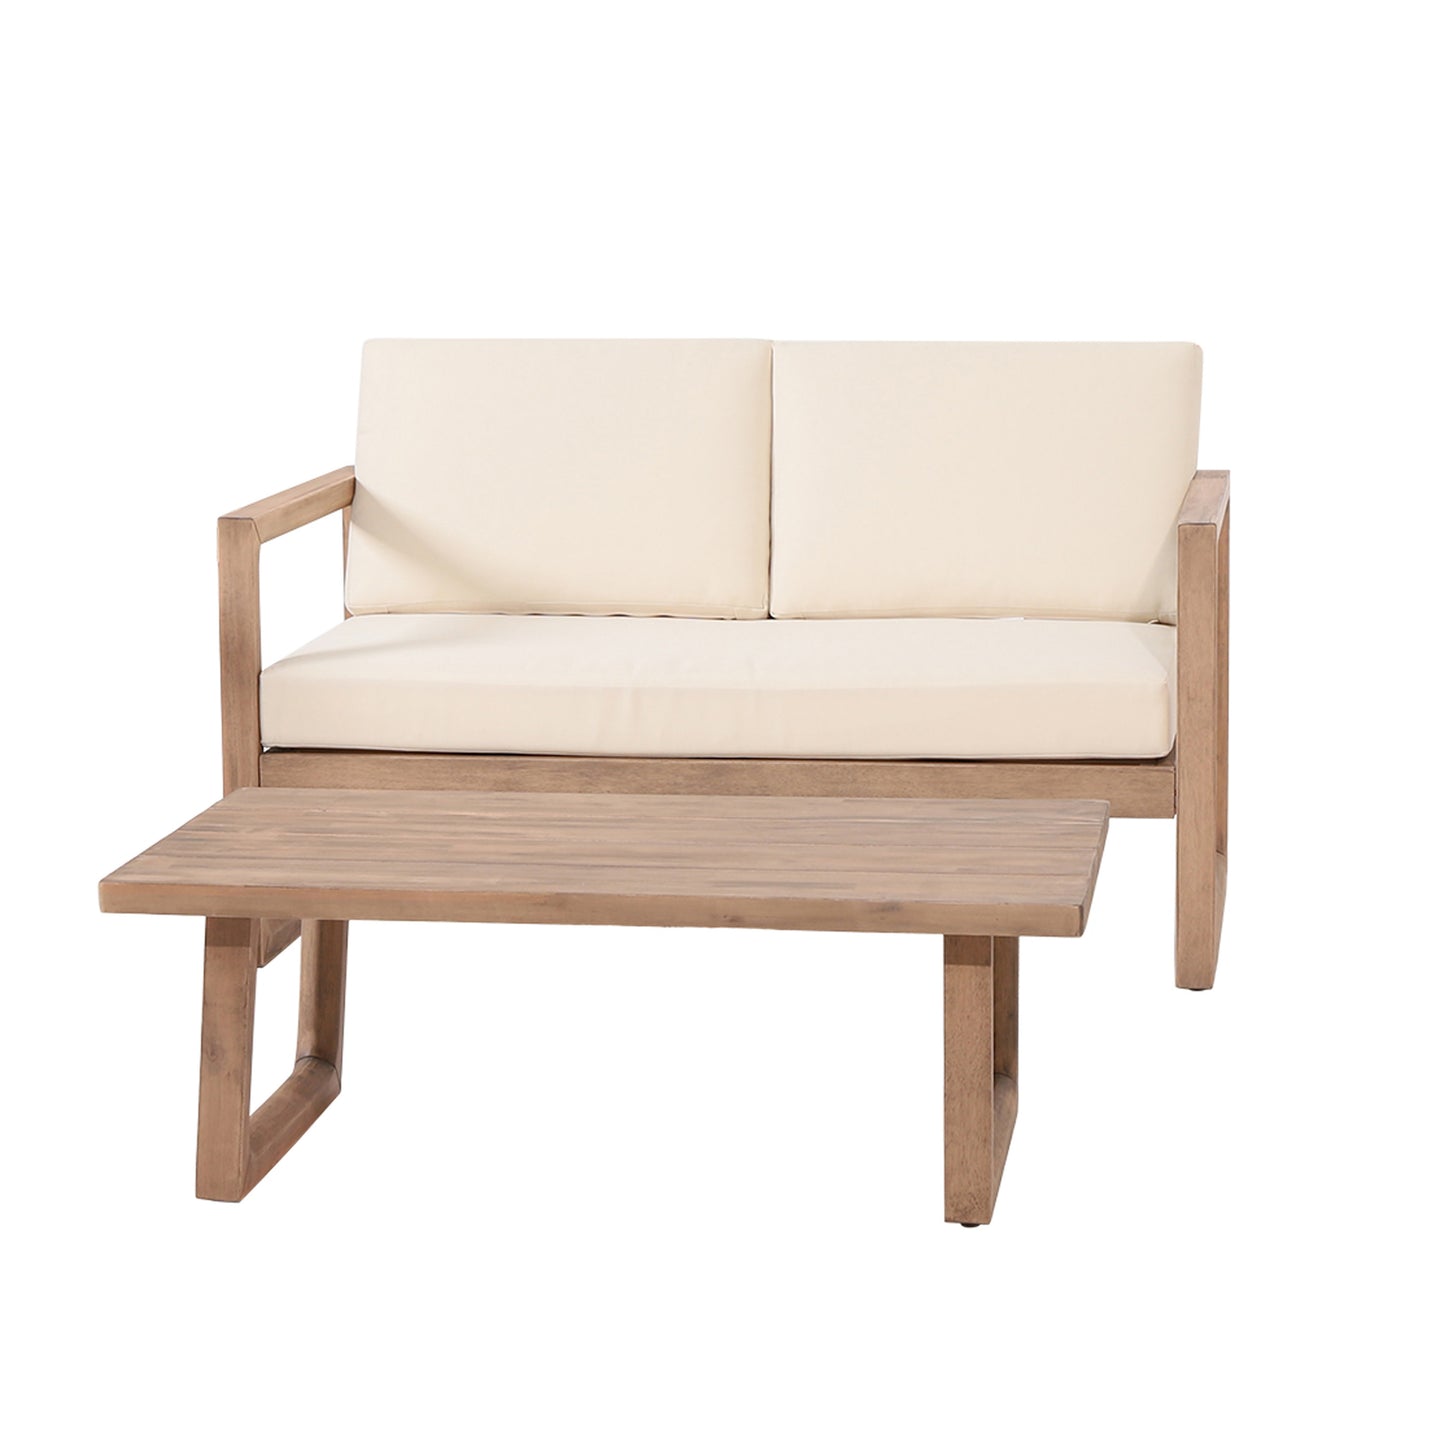 Petteti Outdoor Acacia Wood Loveseat and Coffee Table Set with Cushions, Brown Wash, Beige